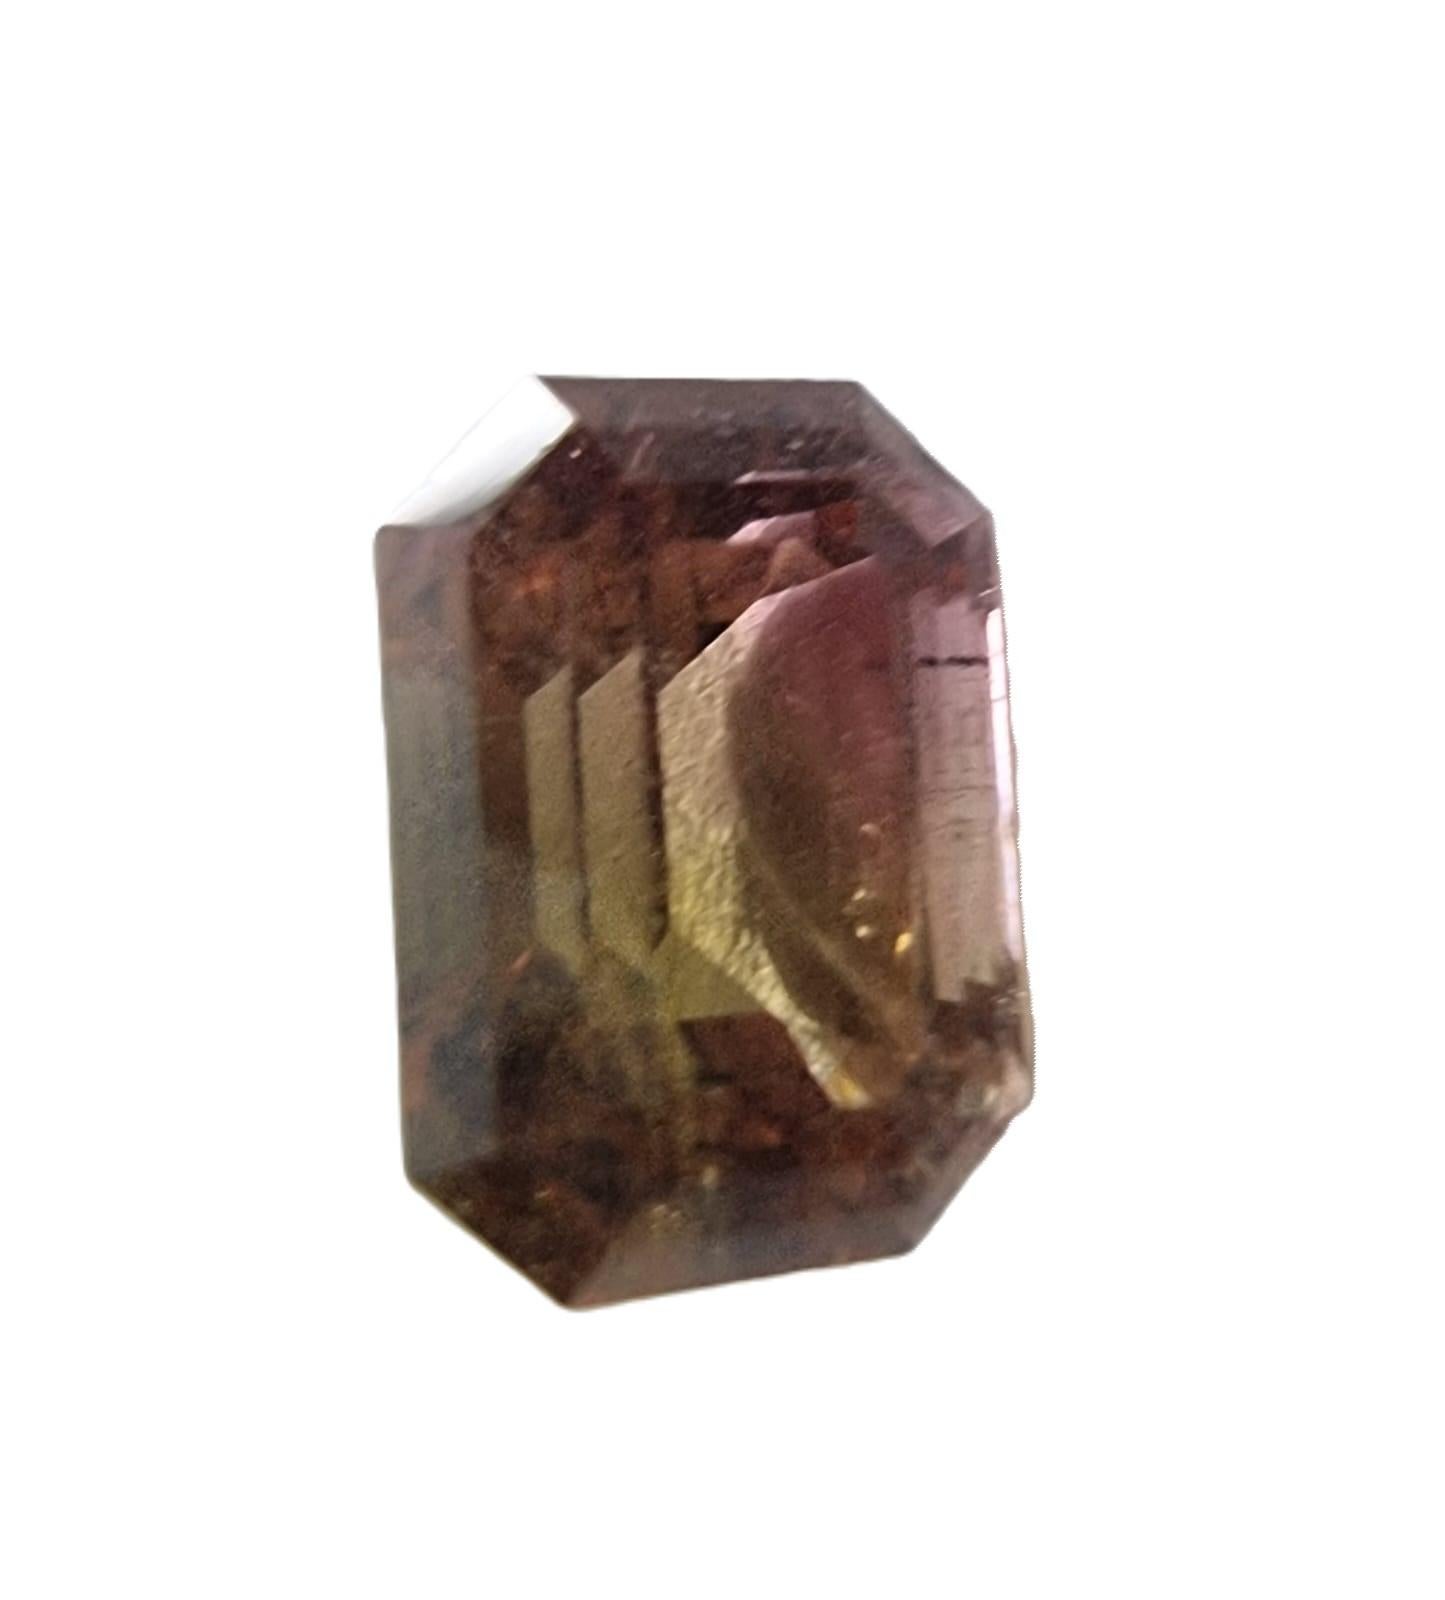 Cushion Cut 2.3ct Emerald Bi-Color Brown and Pink Rubellite Gemstone  For Sale